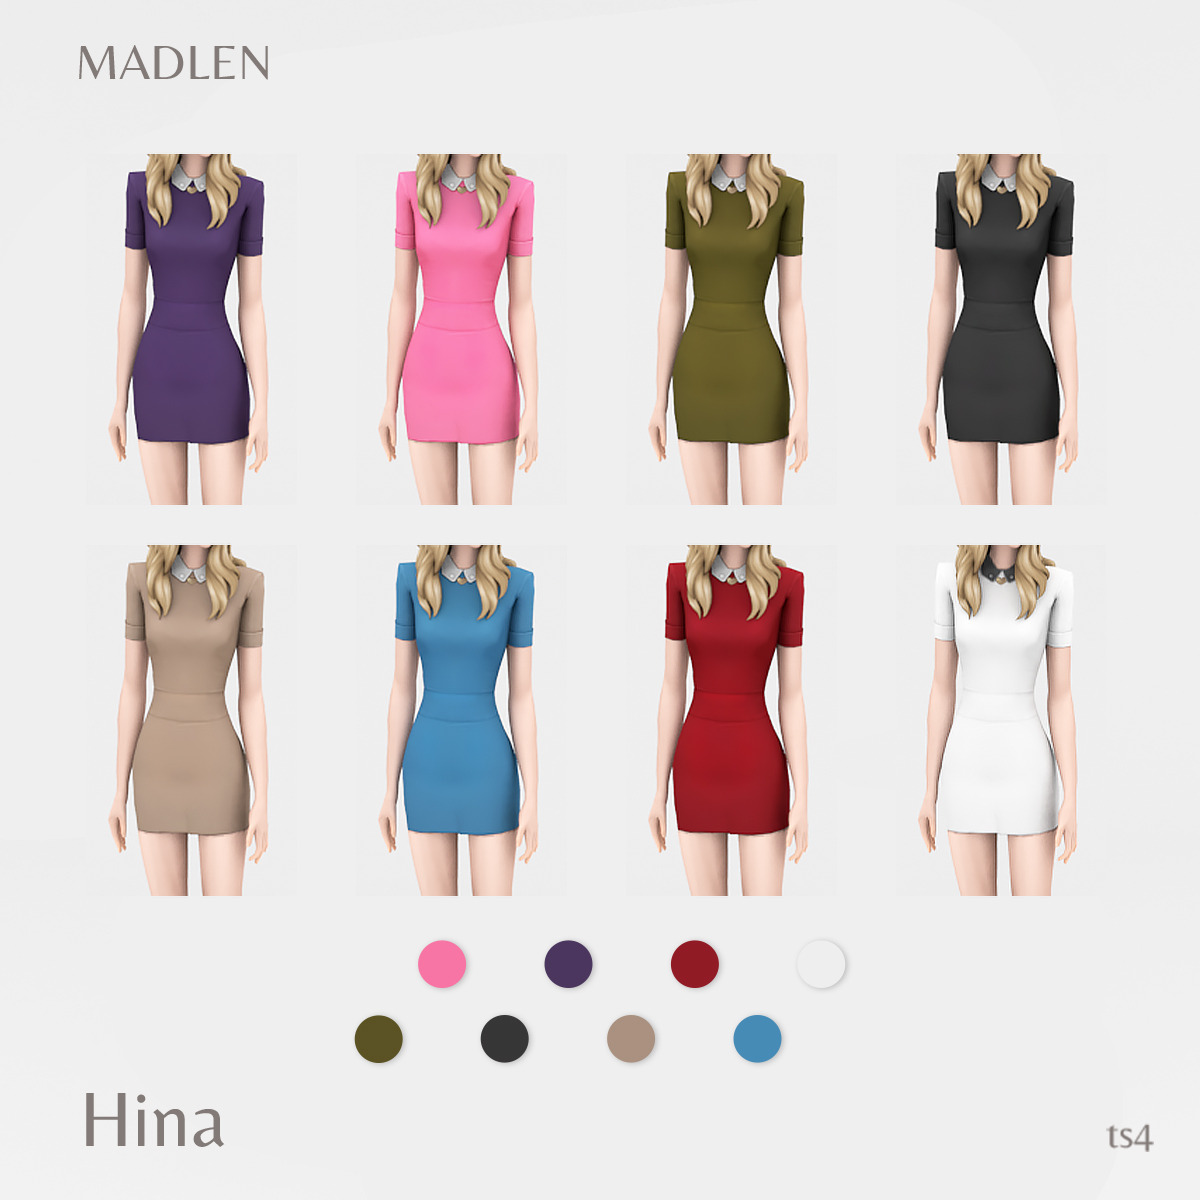 Madlen Hina Outfit Cute Little Collar Dress And A Pair